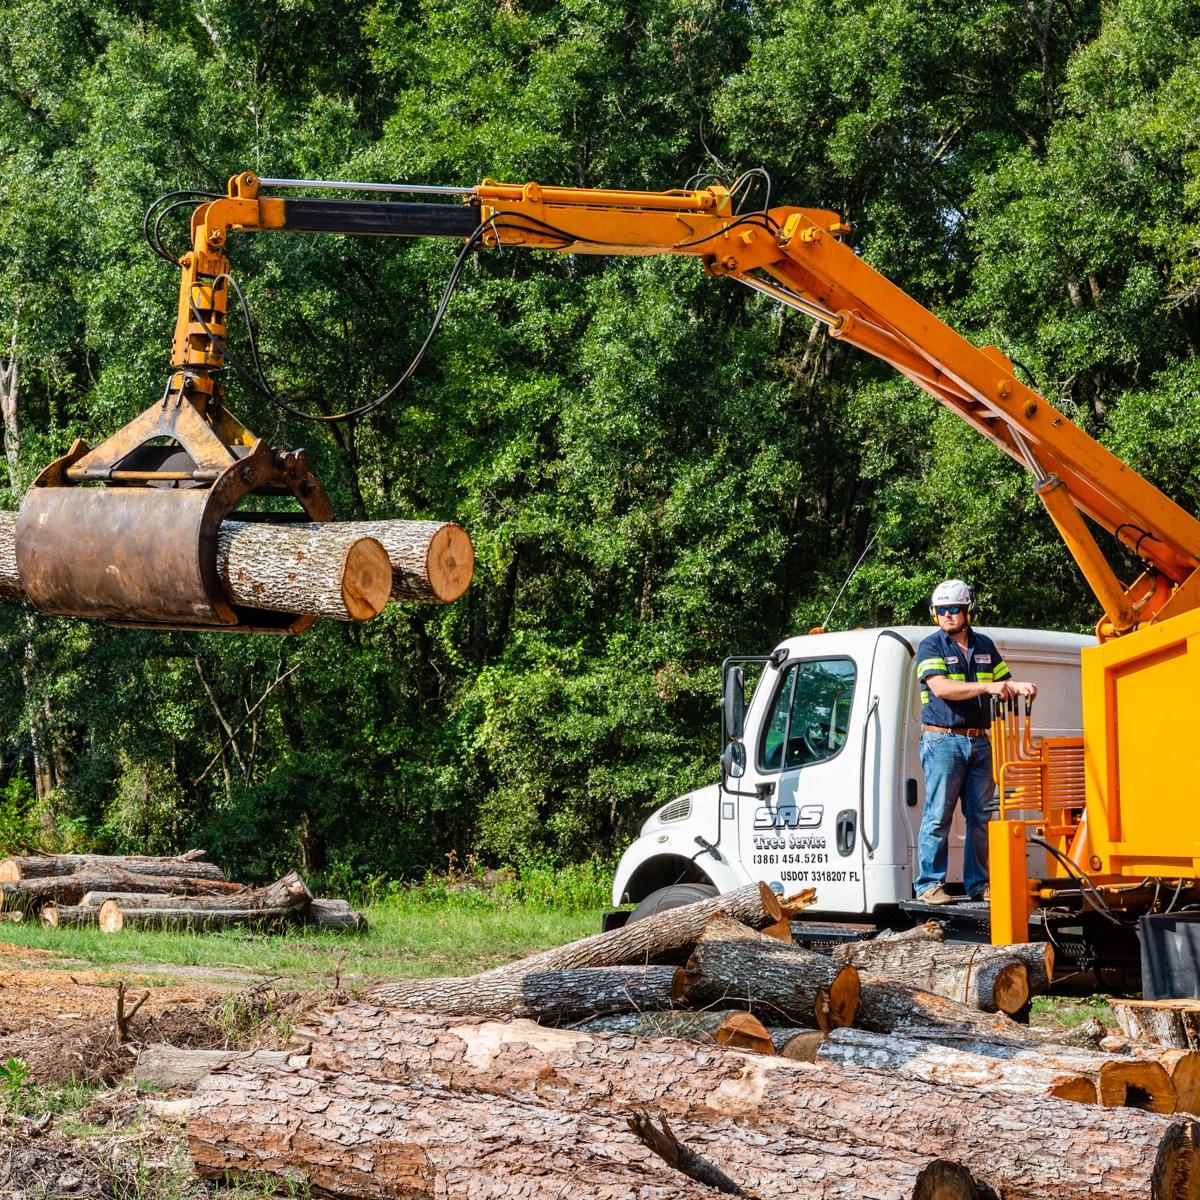 SAS Tree Service is a Fully Licensed and Insured, Family Owned Greater Gainesville Tree Service Company